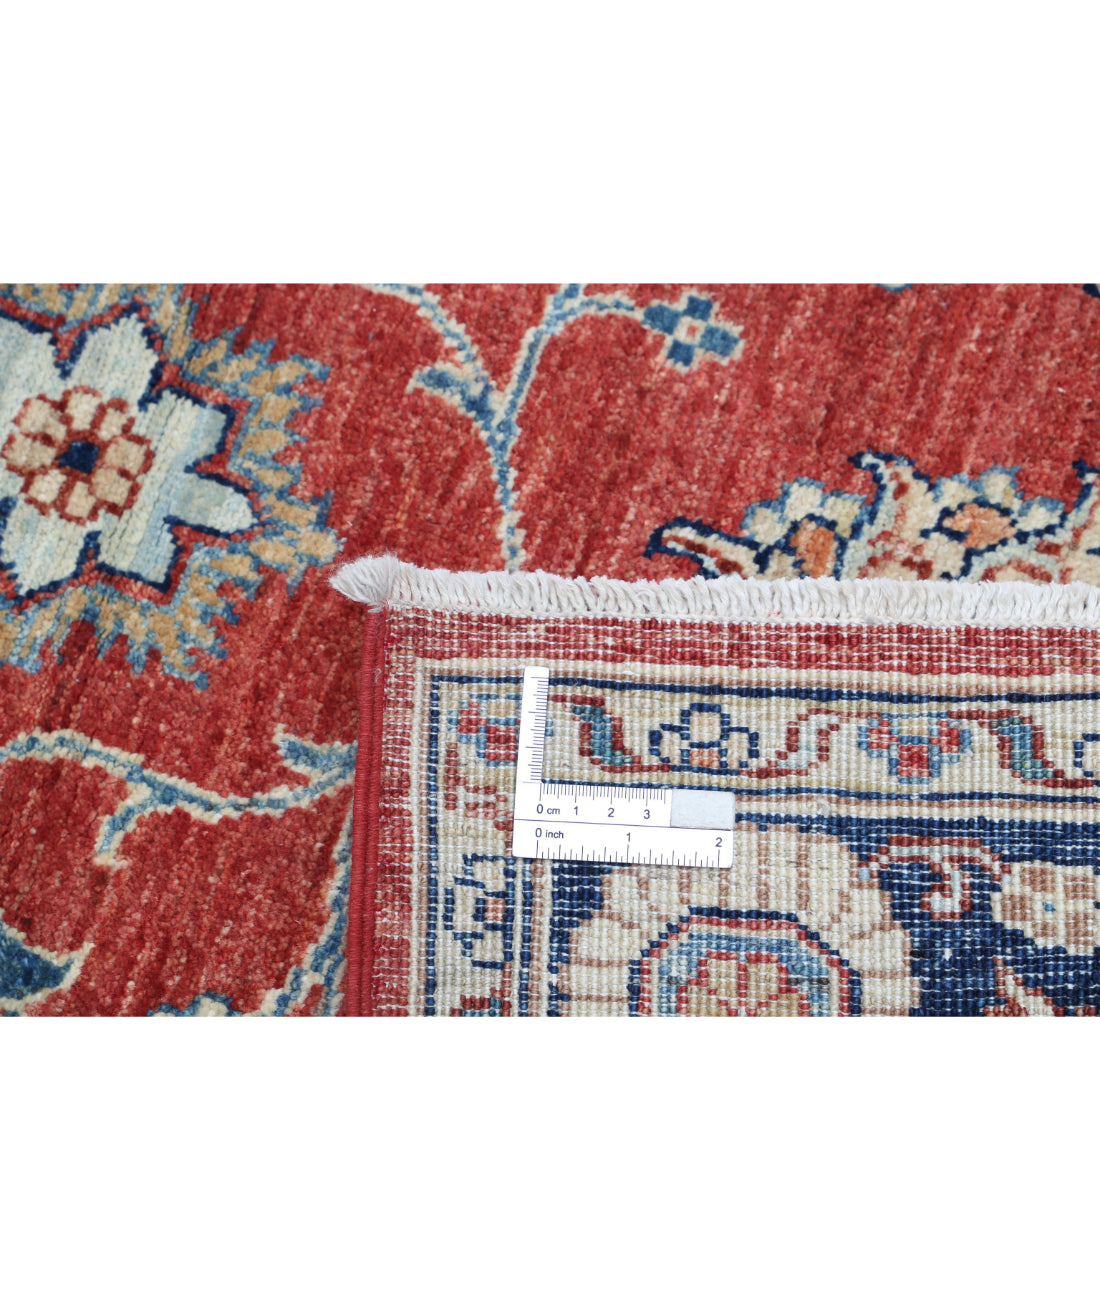 Ziegler 3'1'' X 4'10'' Hand-Knotted Wool Rug 3'1'' x 4'10'' (93 X 145) / Red / Blue